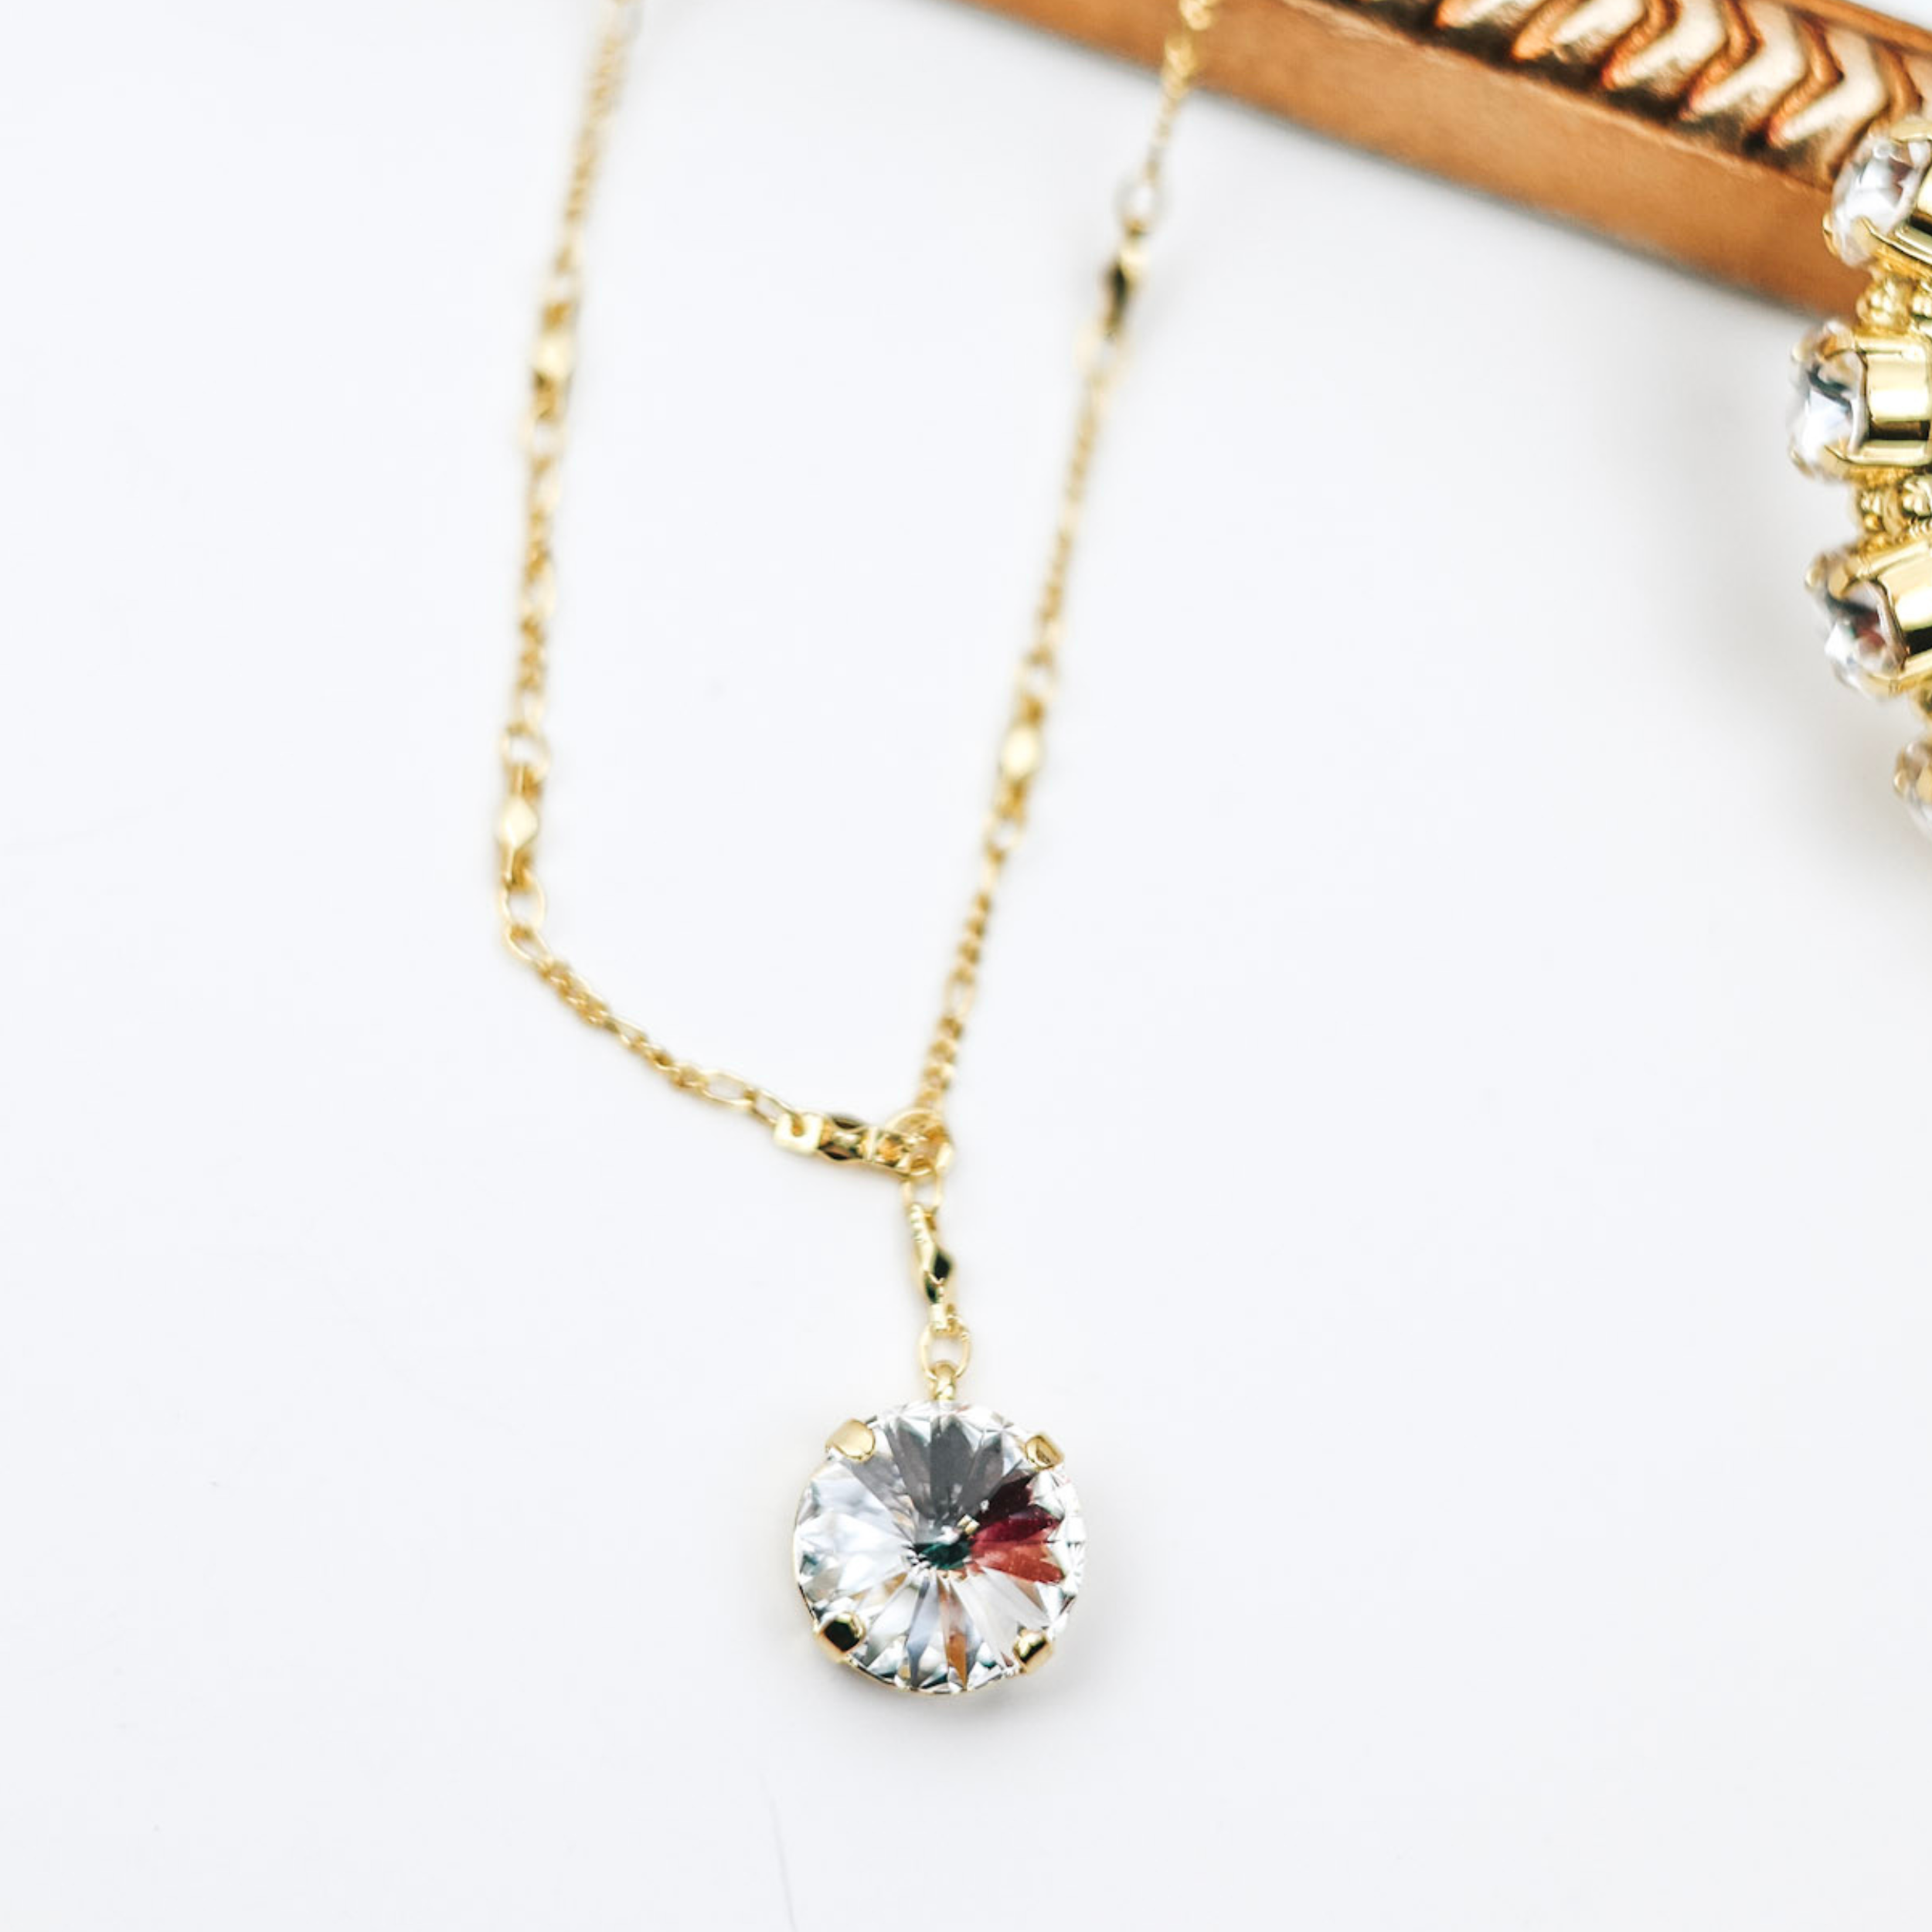 A gold tone necklace with a chain drop with a large circle crystal attached. Pictured on a white background.